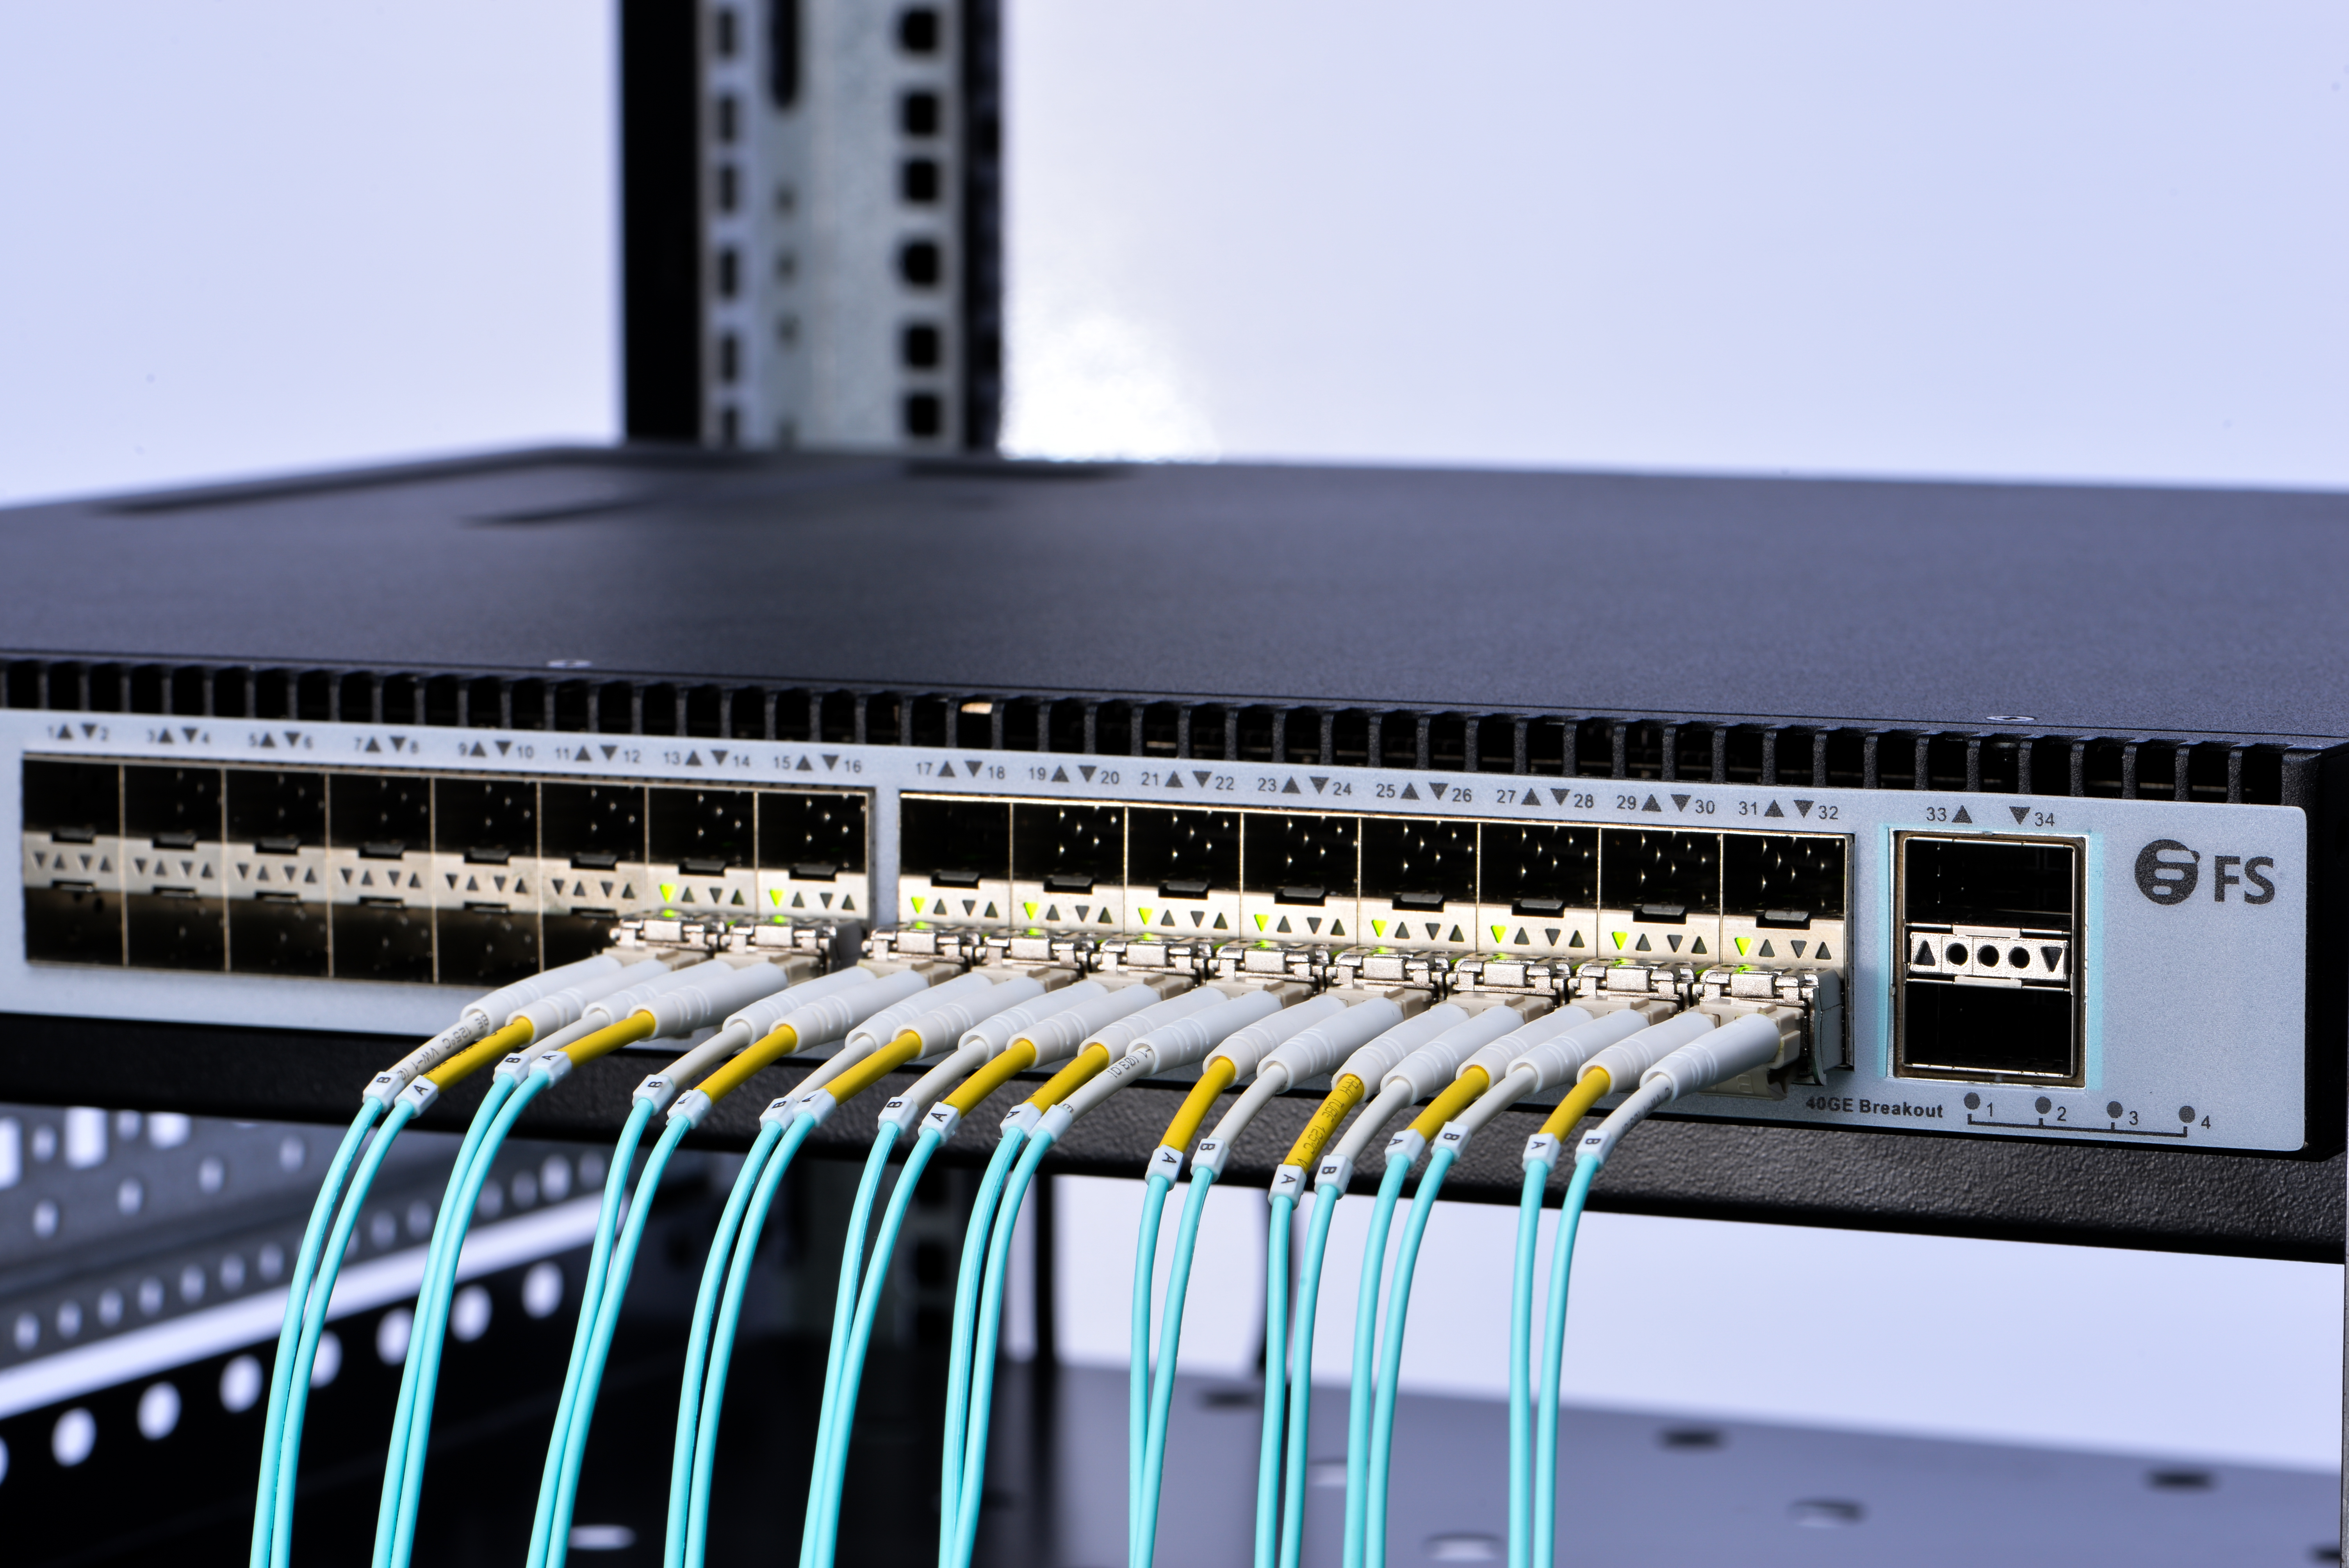 what is the use of patch panel in networking